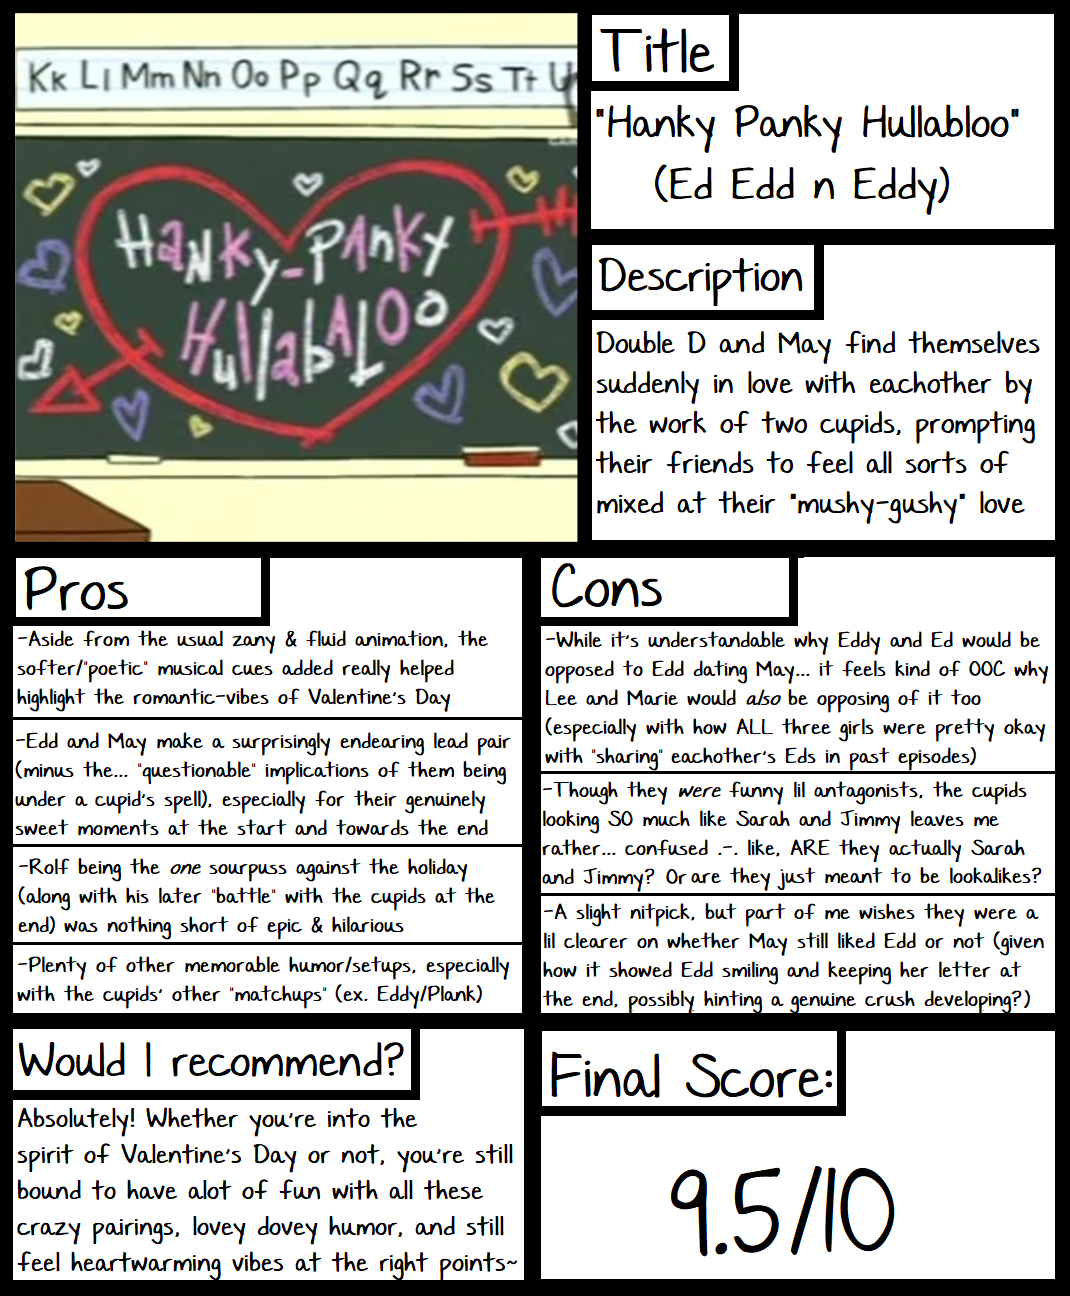 Pros and Cons: Hanky Panky Hullabloo by PurfectPrincessGirl on DeviantArt